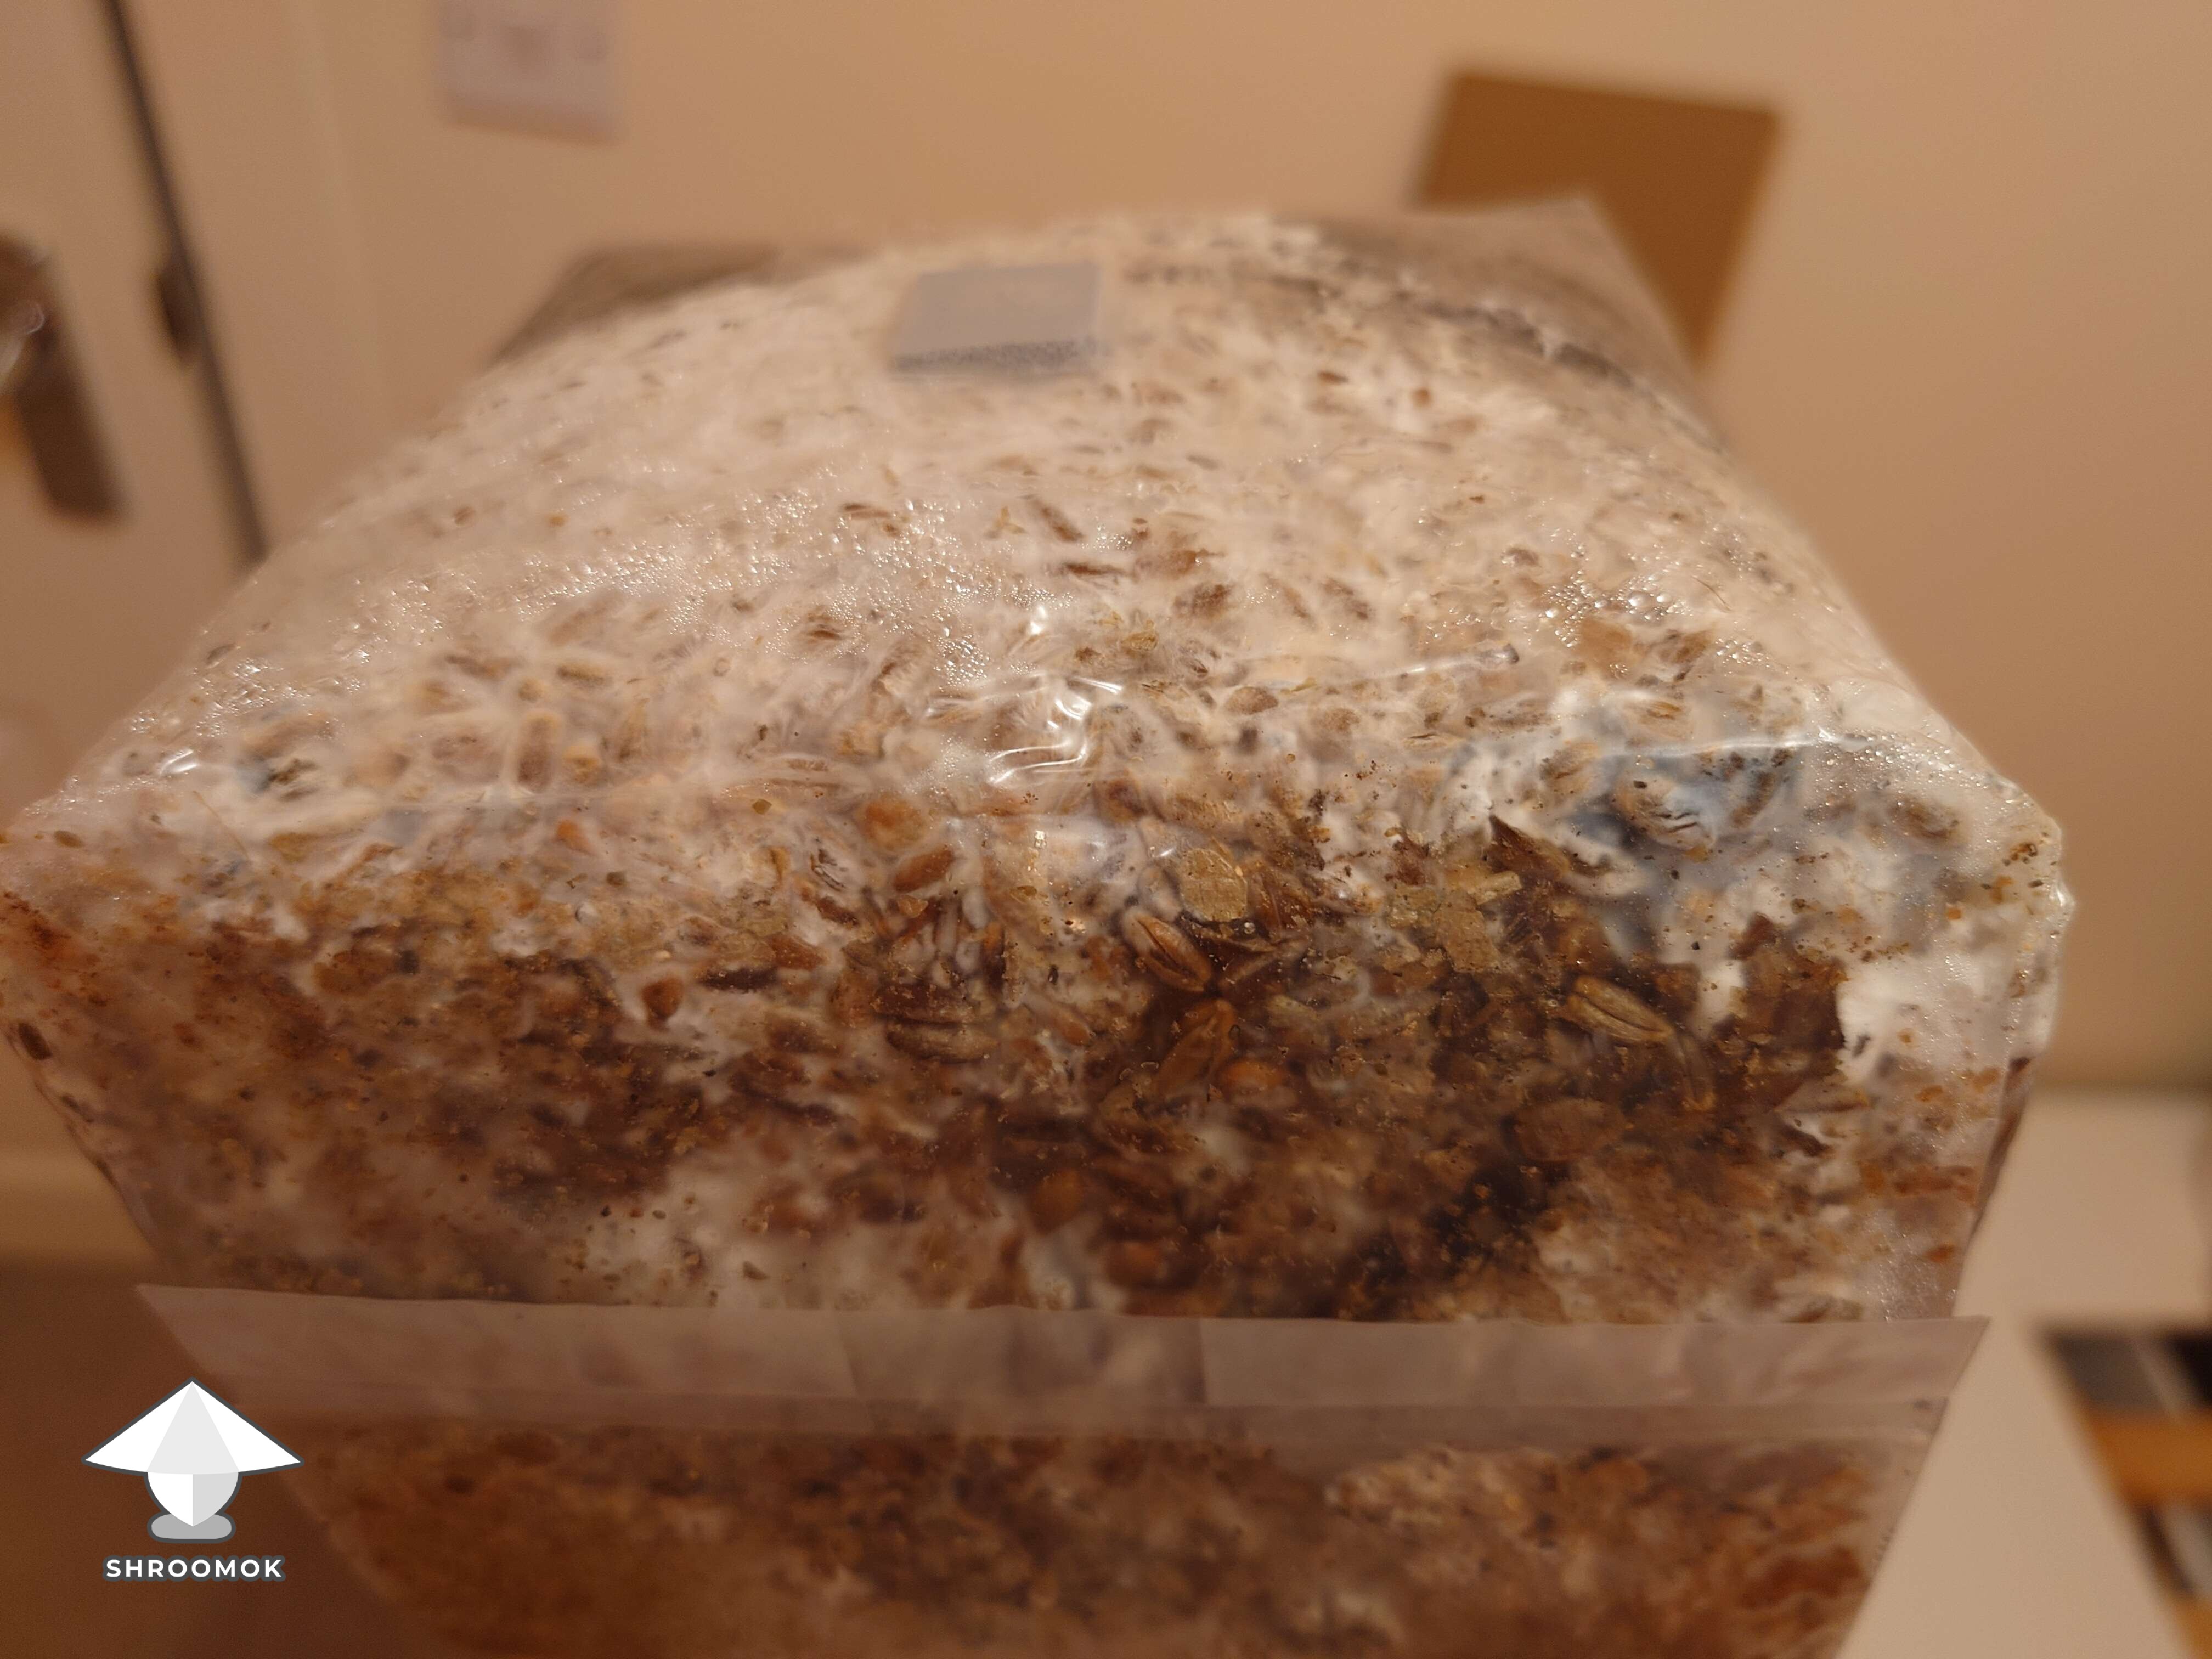 In my first attempt to make own 2 grow bags I think I found some contamination. May you share your opinions what would you do in situation like this